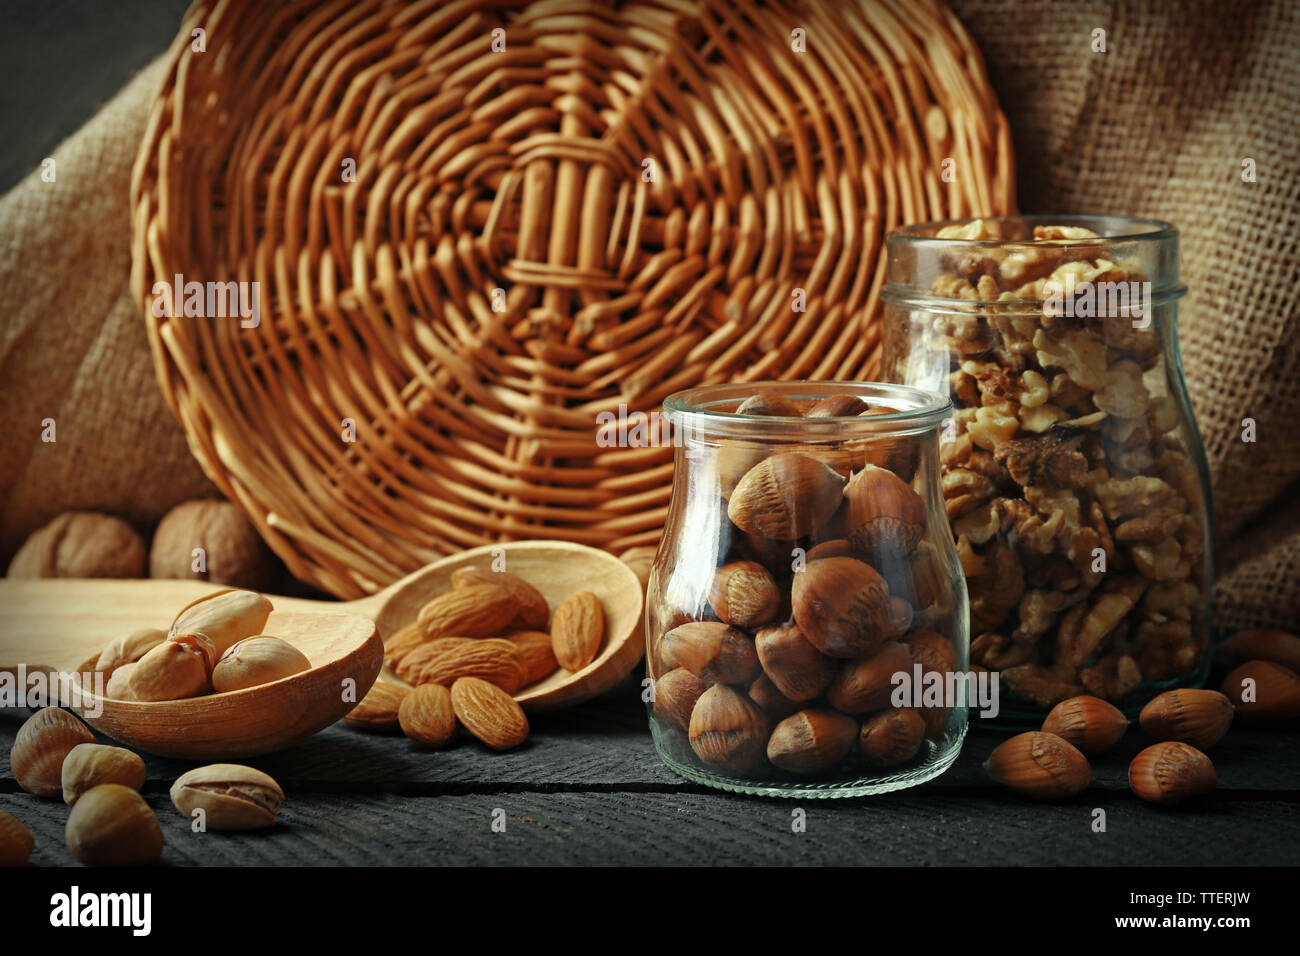 Mix of nuts in the glass jars and wooden spoon, on the table Stock Photo